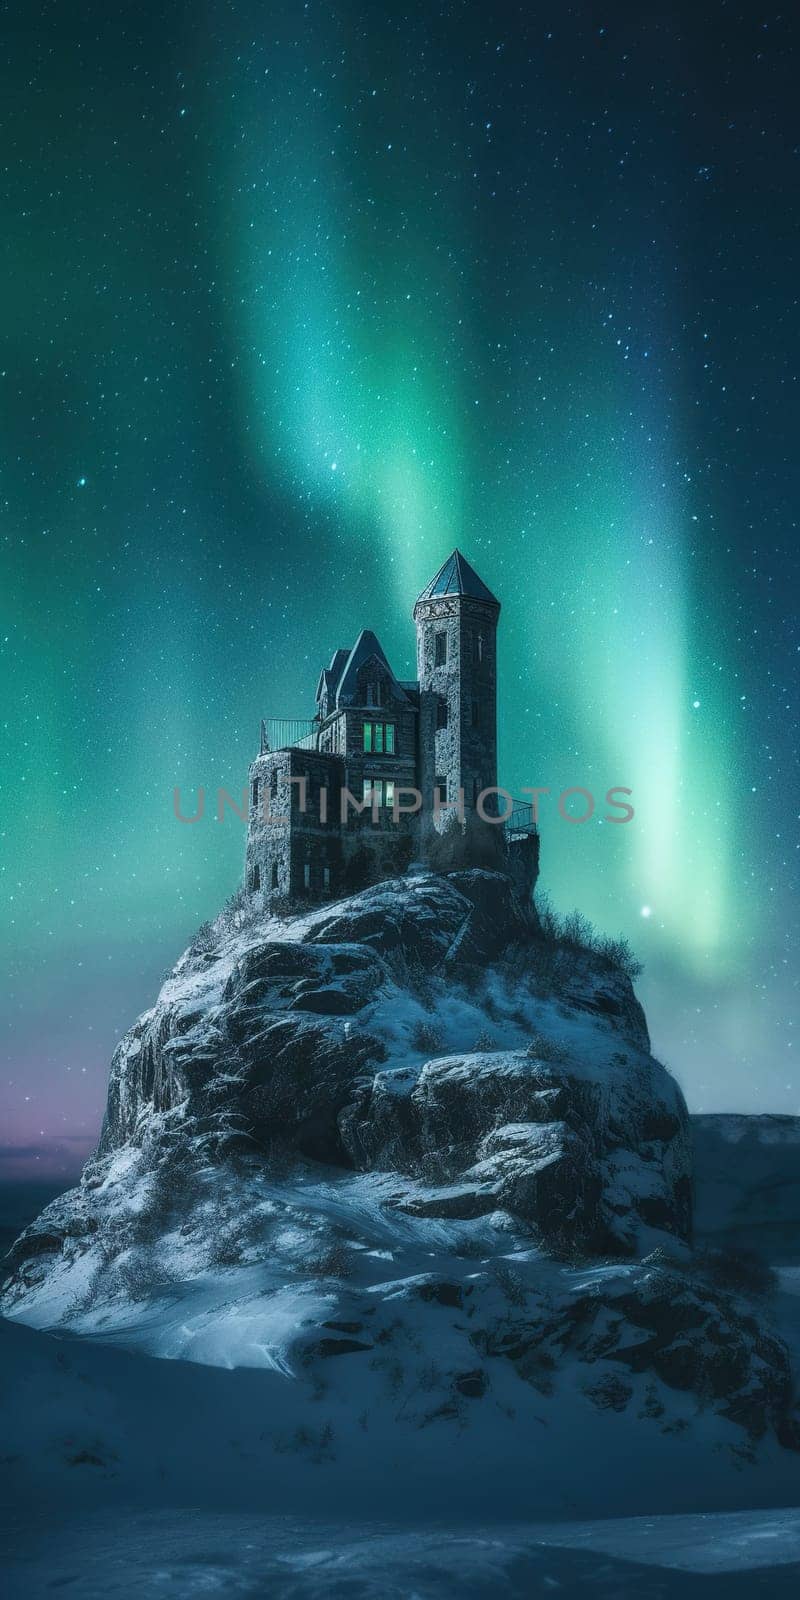 Medieval Castle On Hill During Northern Lights In Winter Night by tan4ikk1